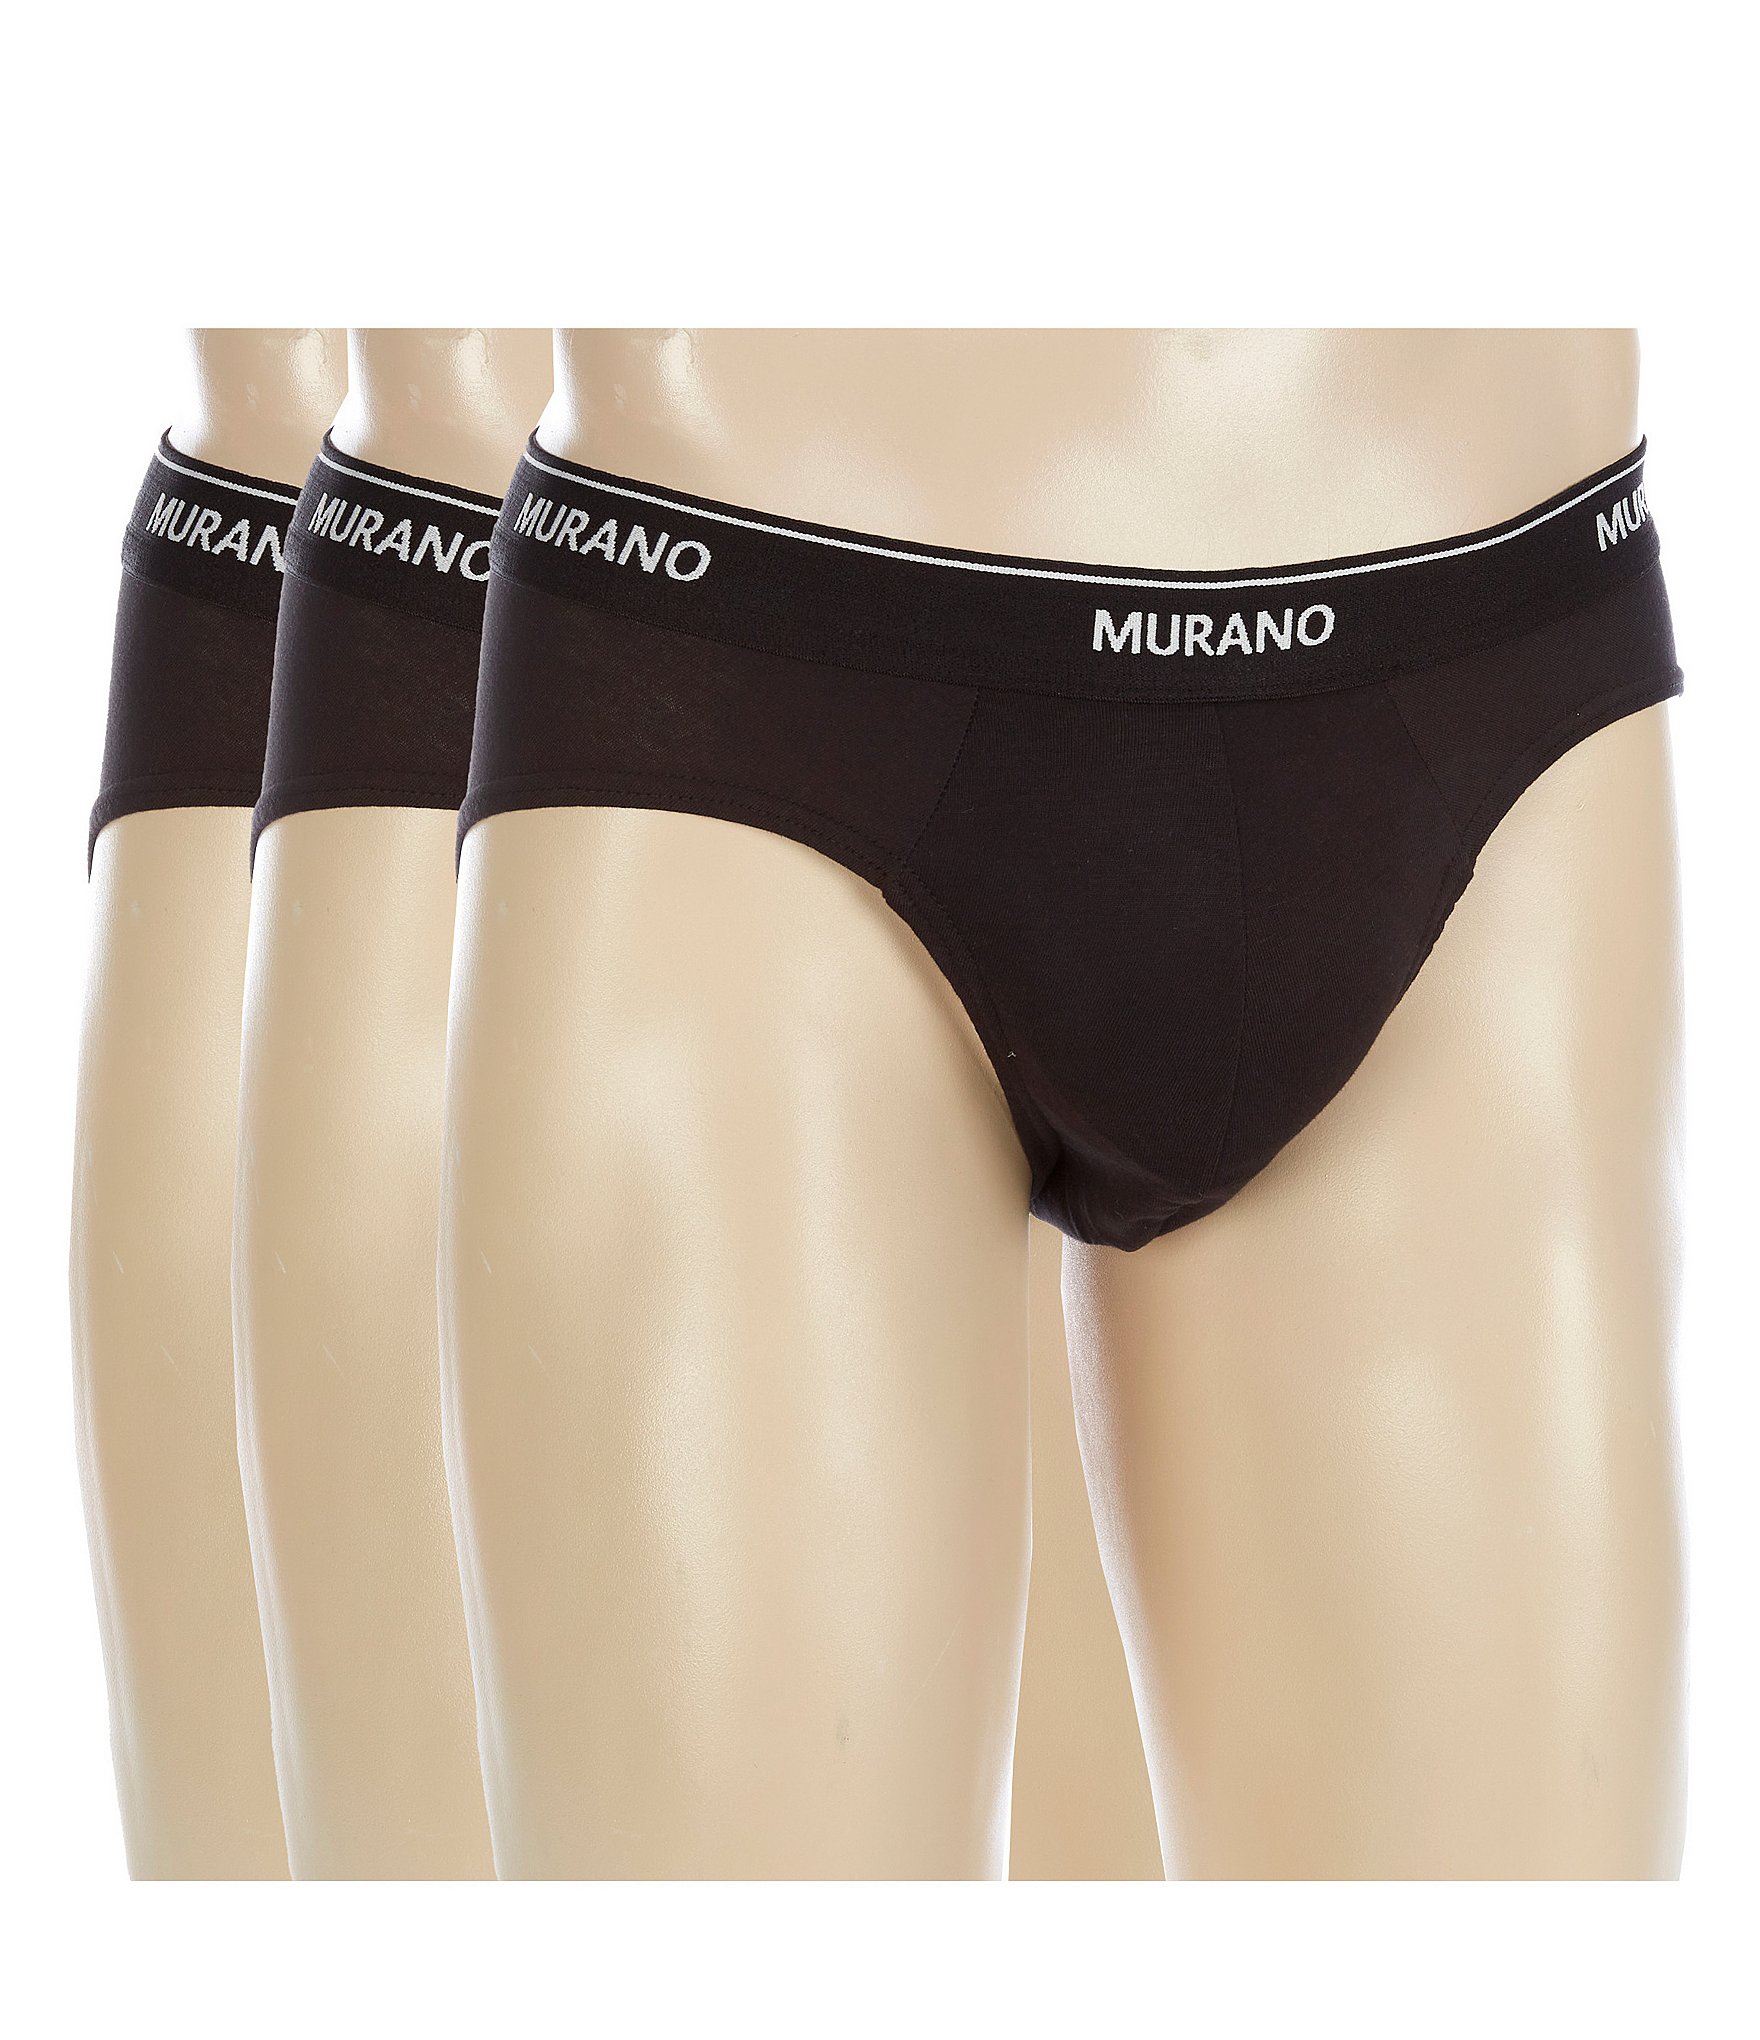 Brief Underwear For Men's Pack of 3 Multicolor – The Cut Price